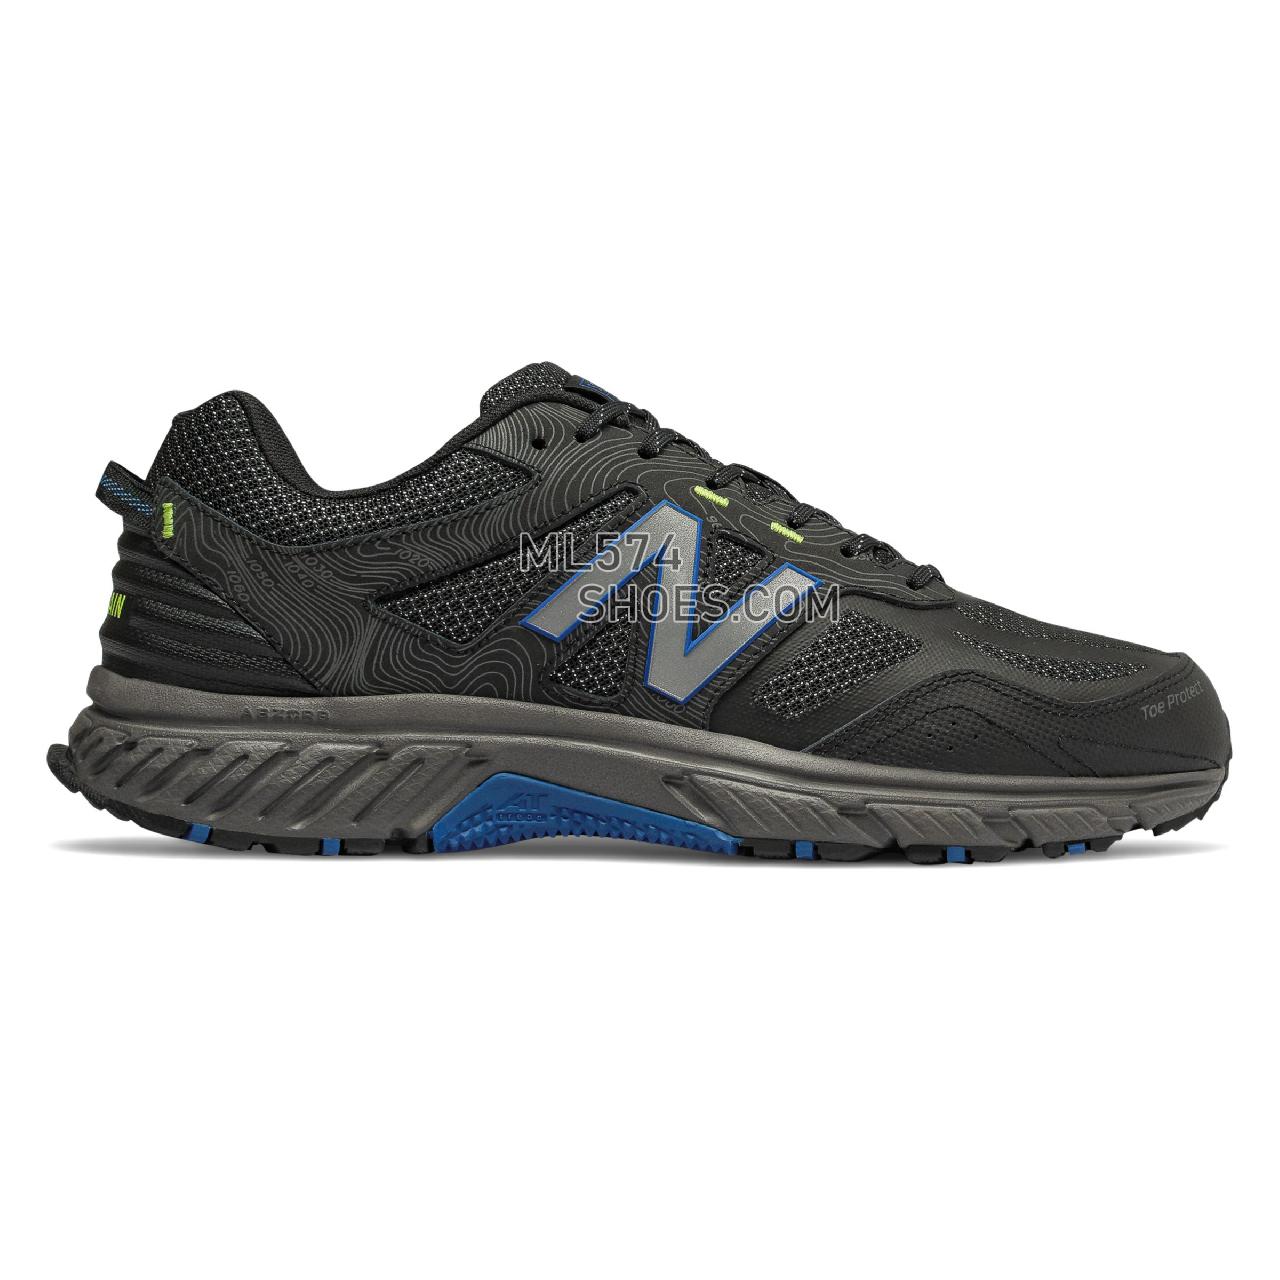 New Balance 510v4 Trail - Men's 510 - Running Magnet with Black and Lake Blue - MT510CR4